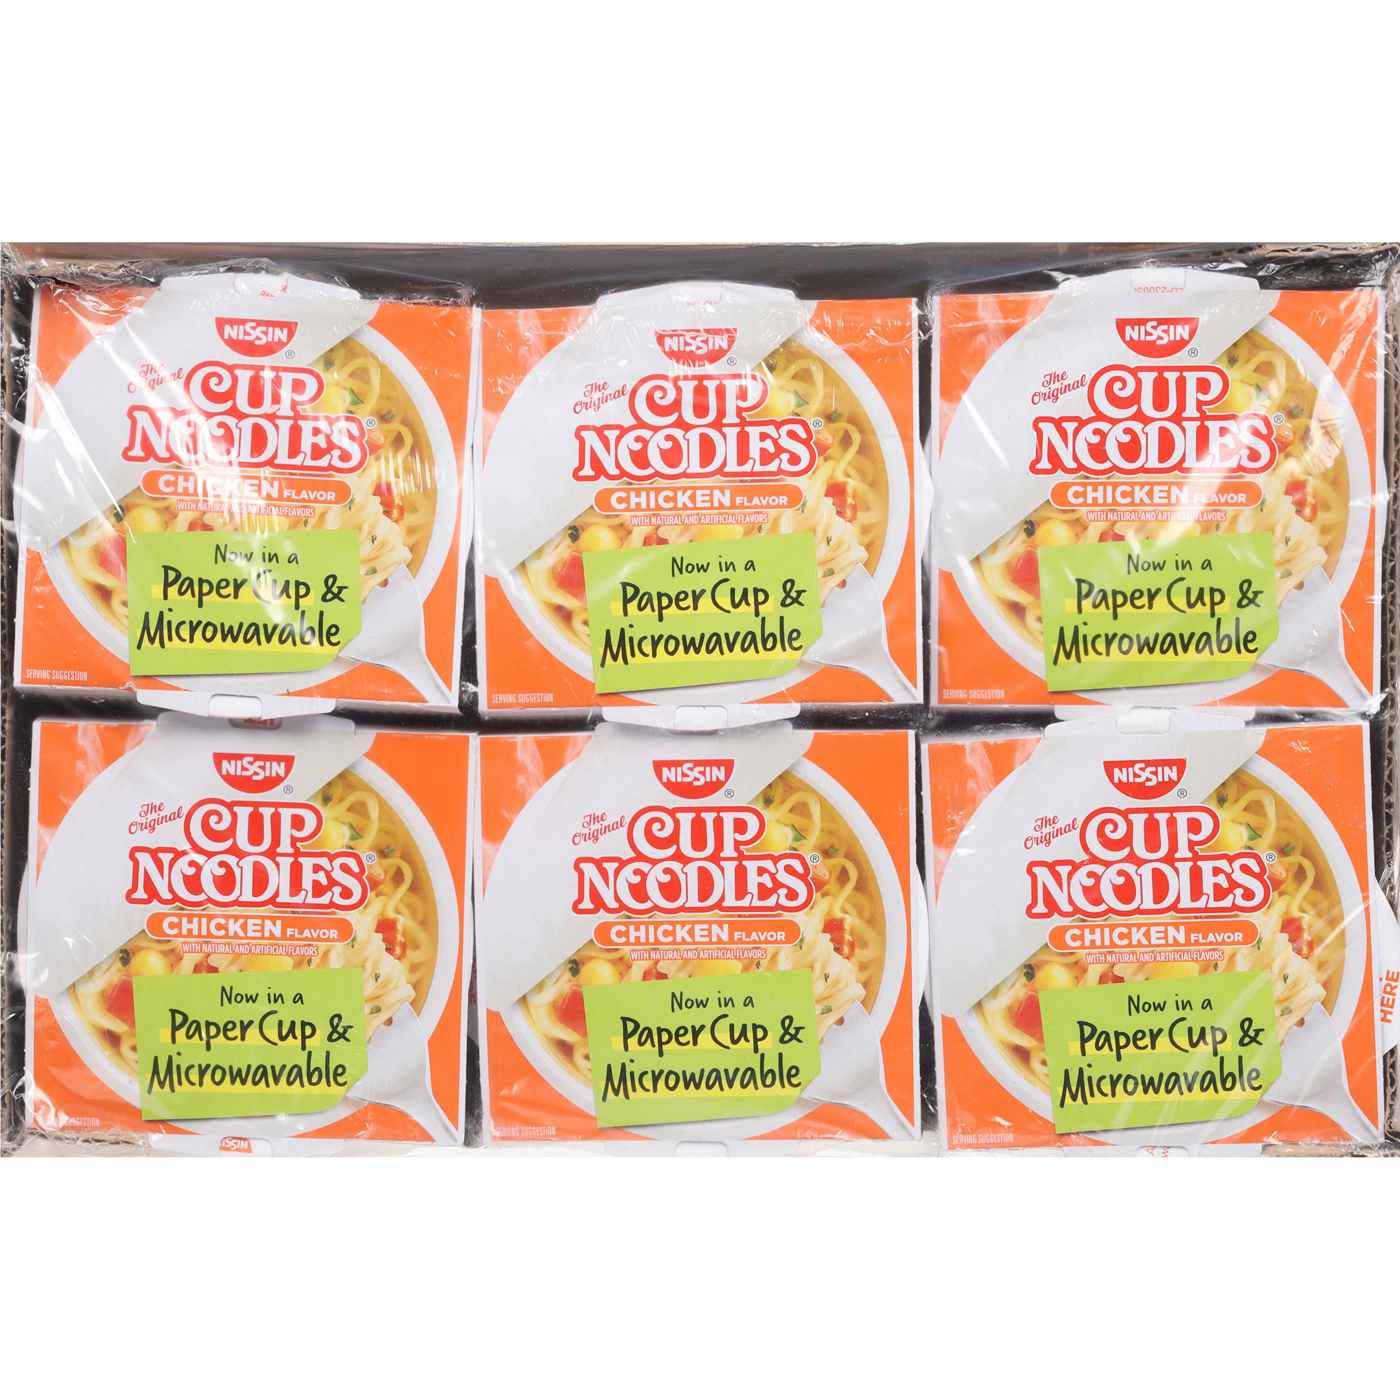 Nissin Chicken Cup Noodles Value Pack; image 2 of 5